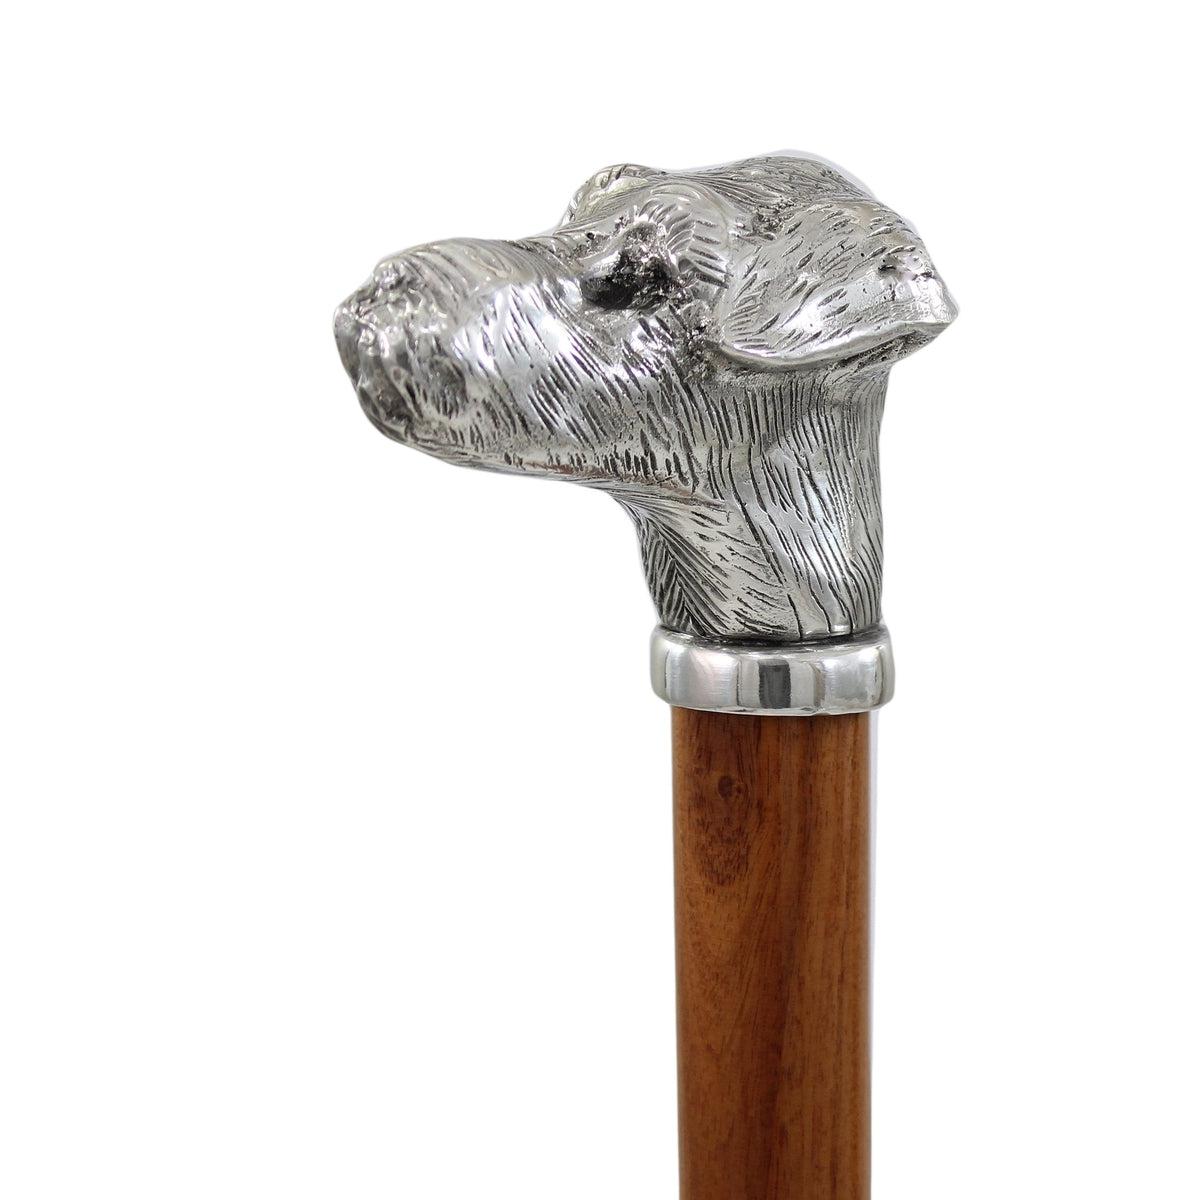 Solid Pewter Head and Beechwood Shaft Schnauzer Walking Stick or Cane